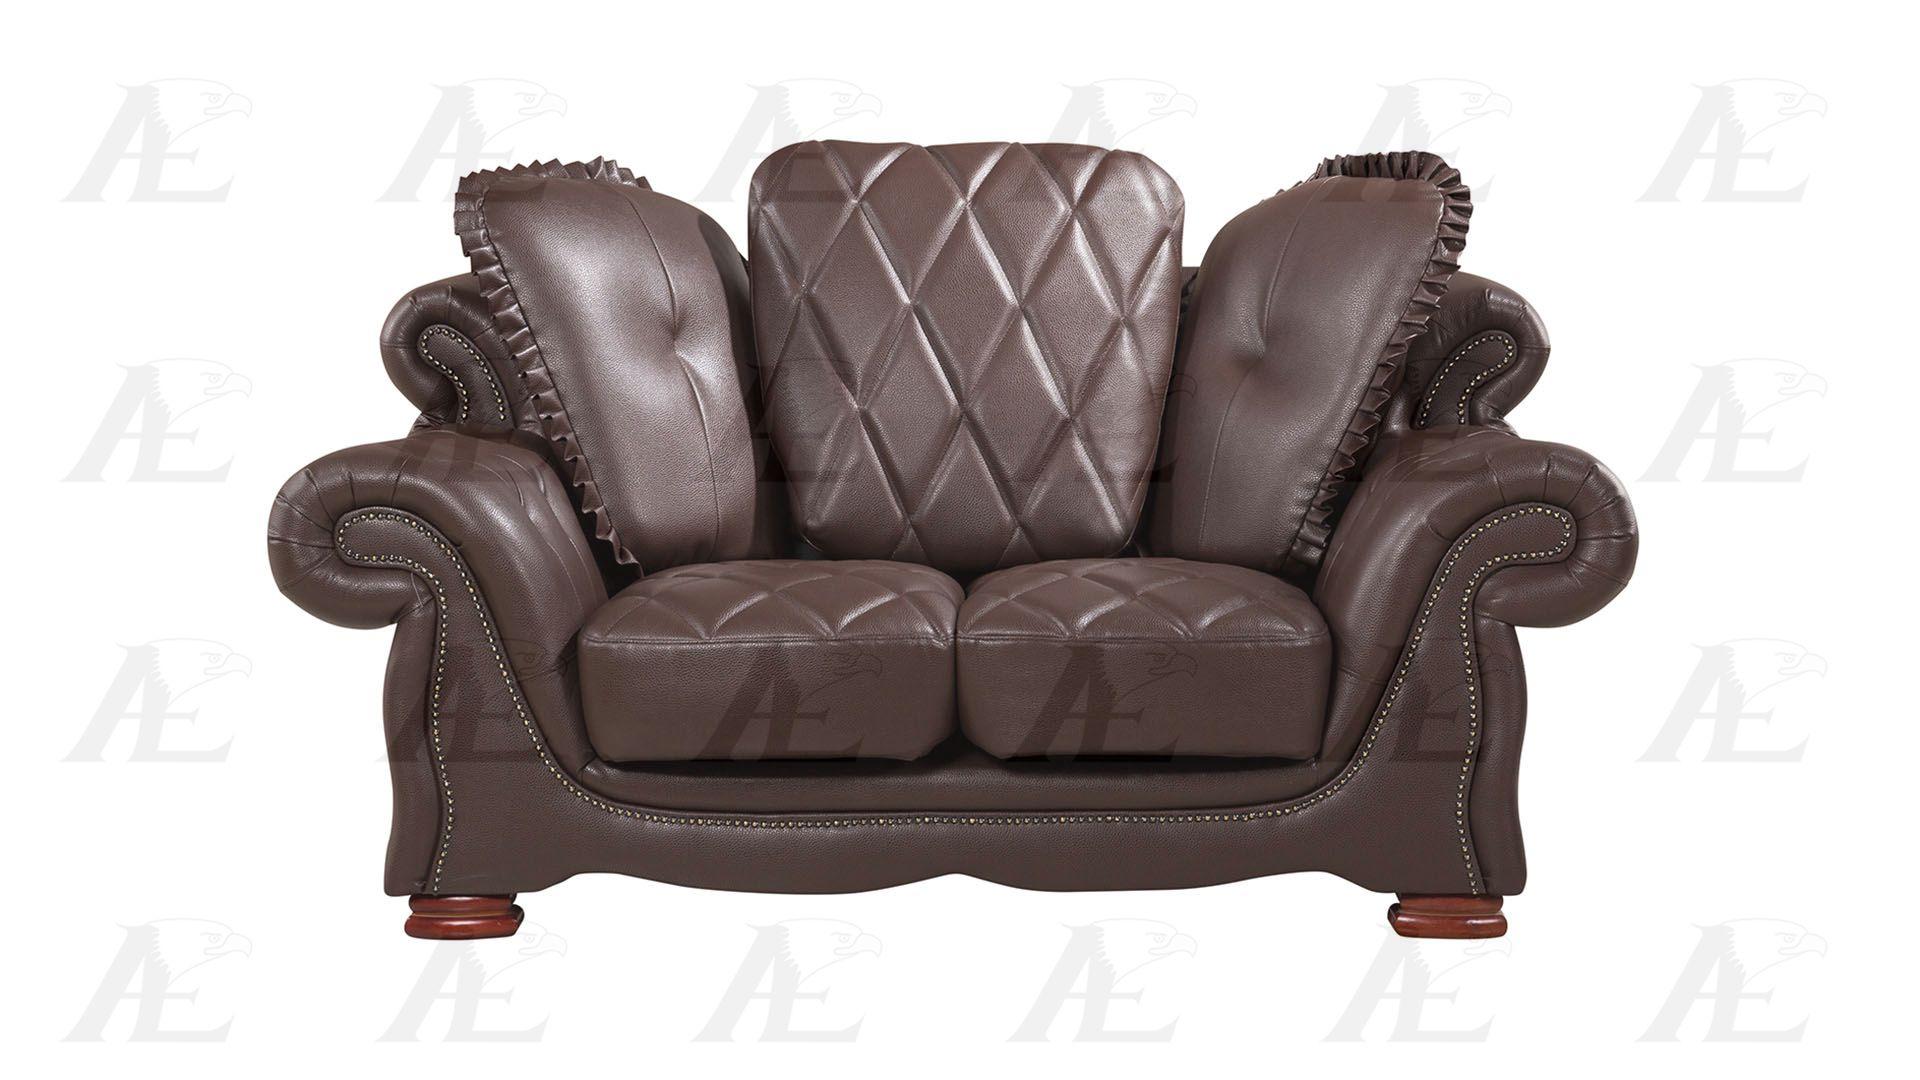 

                    
American Eagle Furniture AE-D803-DB Sofa and Loveseat Set Dark Brown Bonded Leather Purchase 
